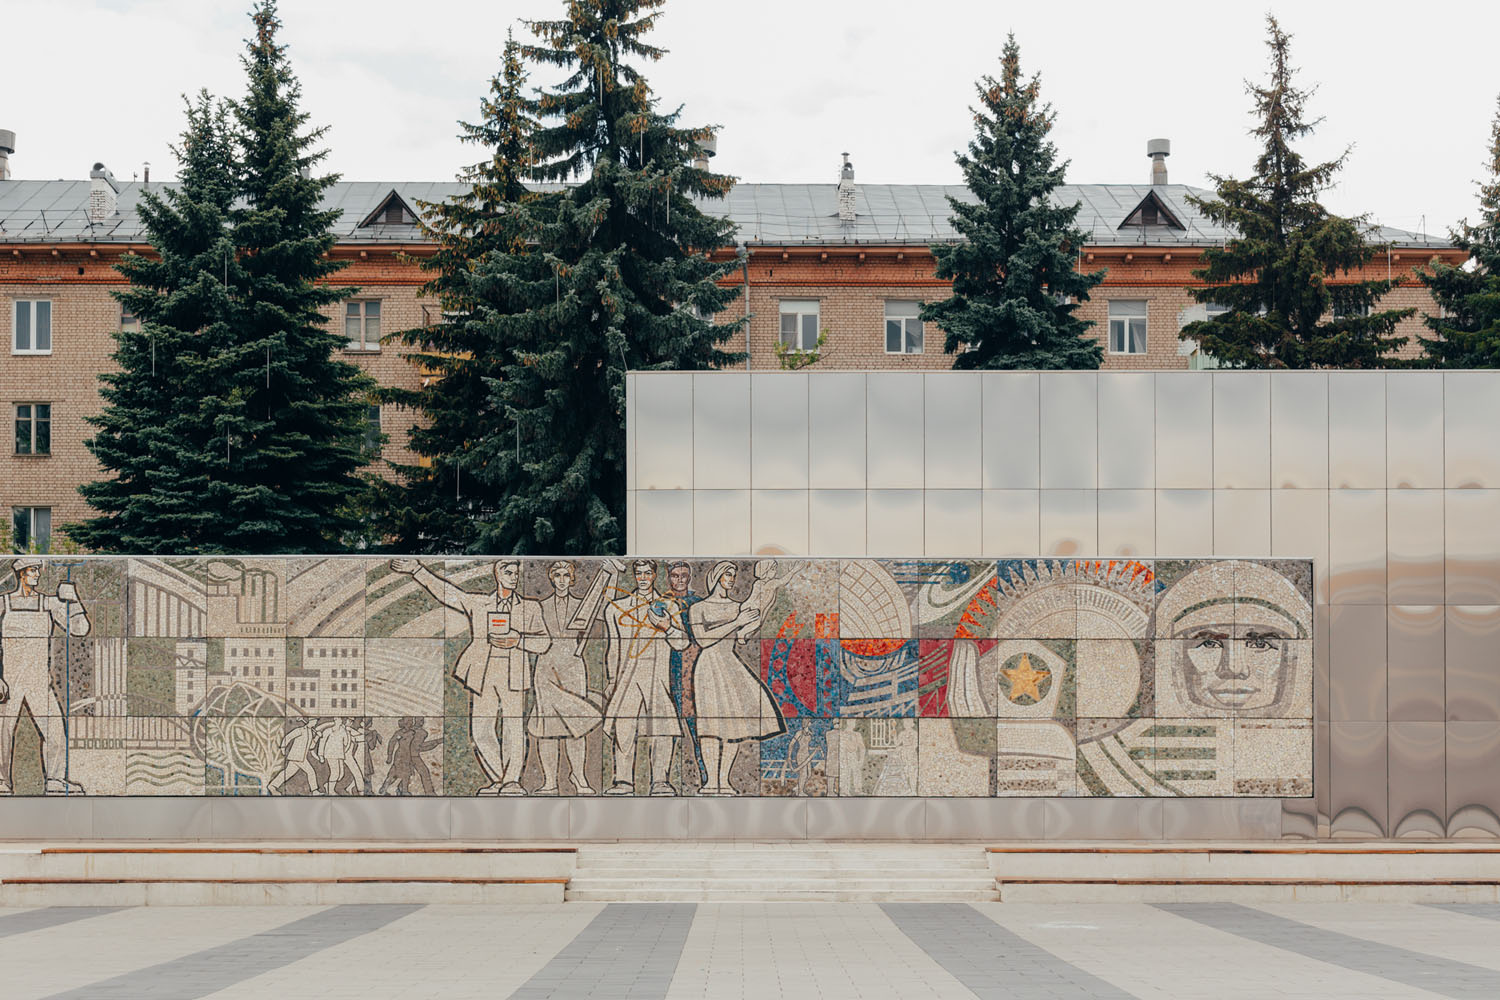 Soviet mosaic on the main square of Korolev (Moscow region).